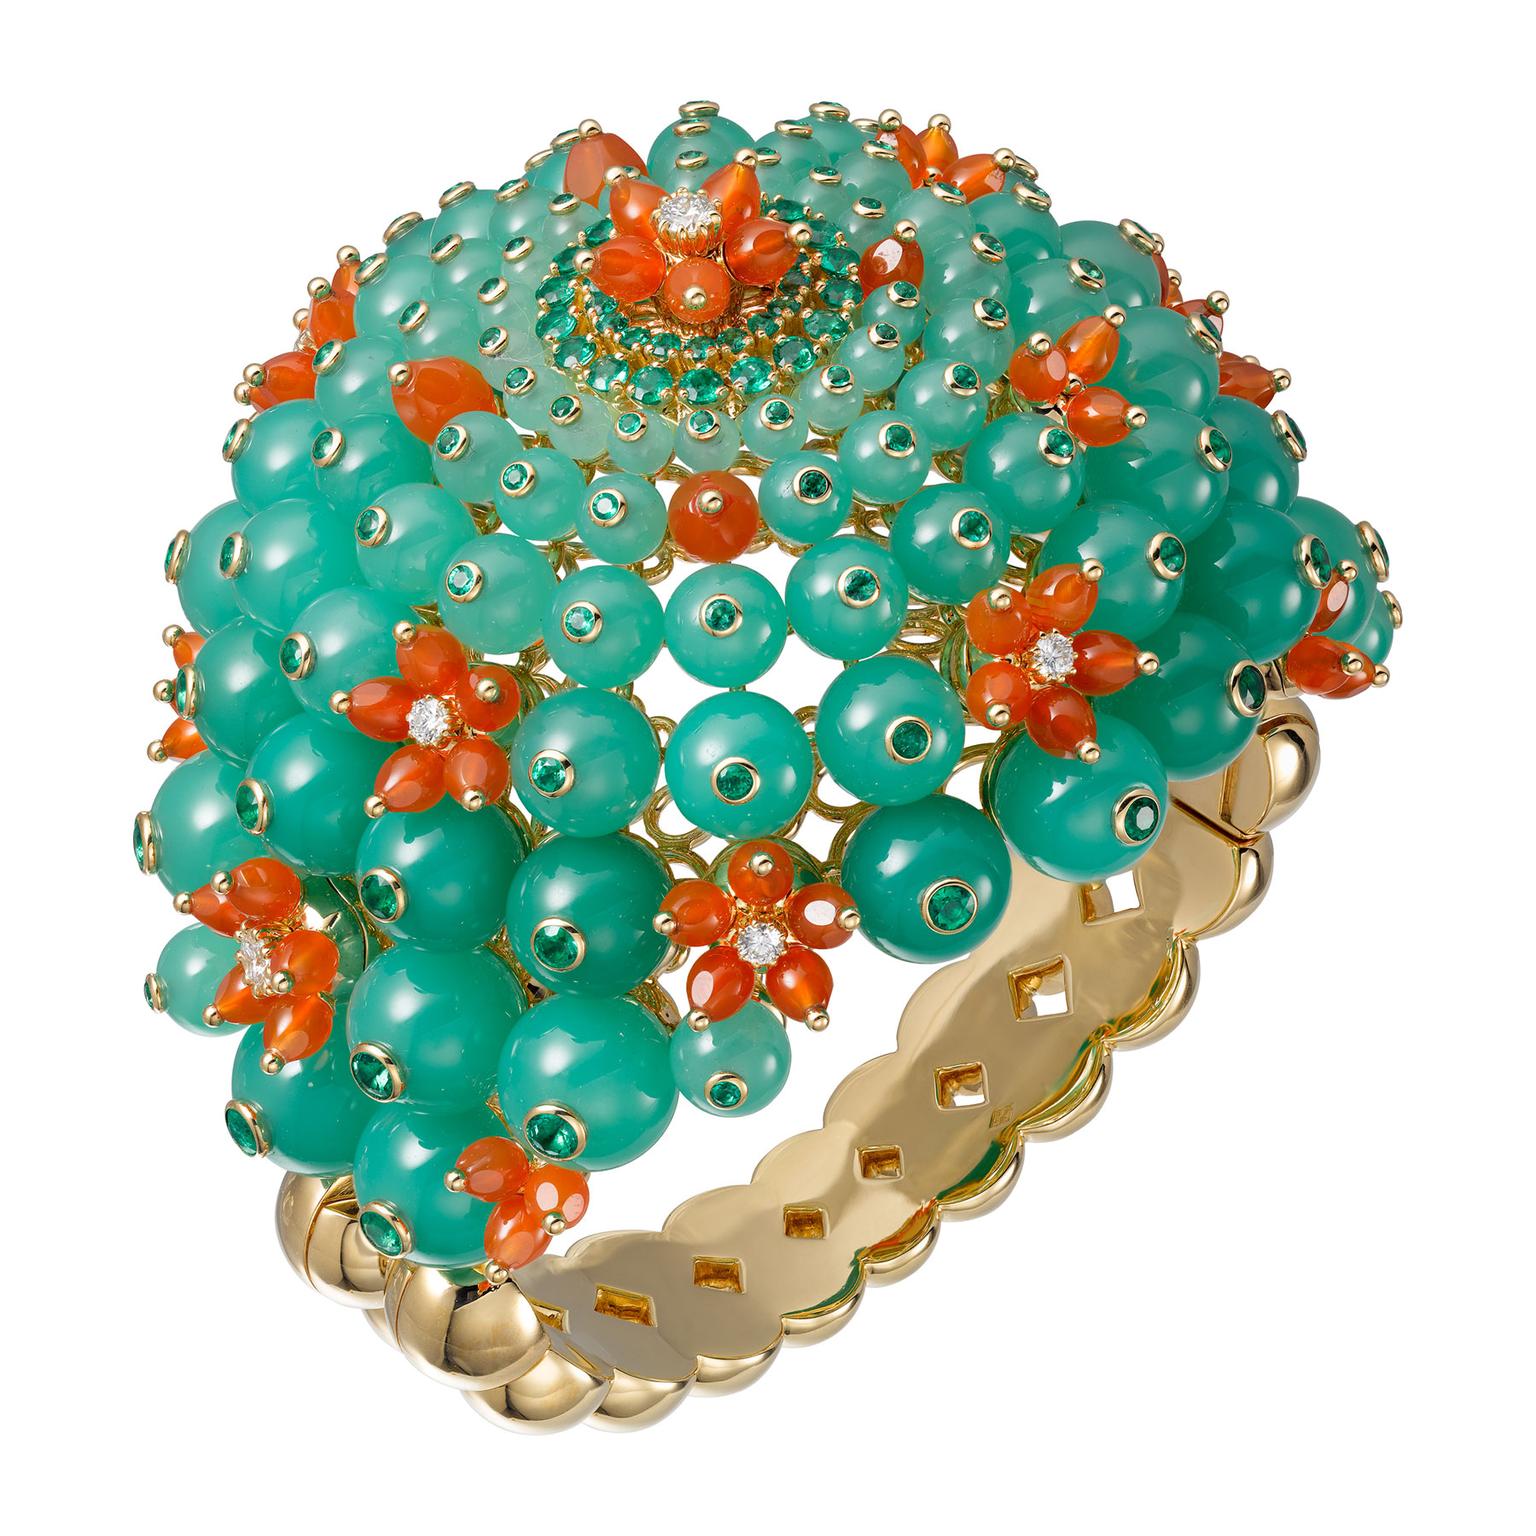 Cactus de Cartier cuff in yellow gold with chrysoprase, emerald and carnelian beads